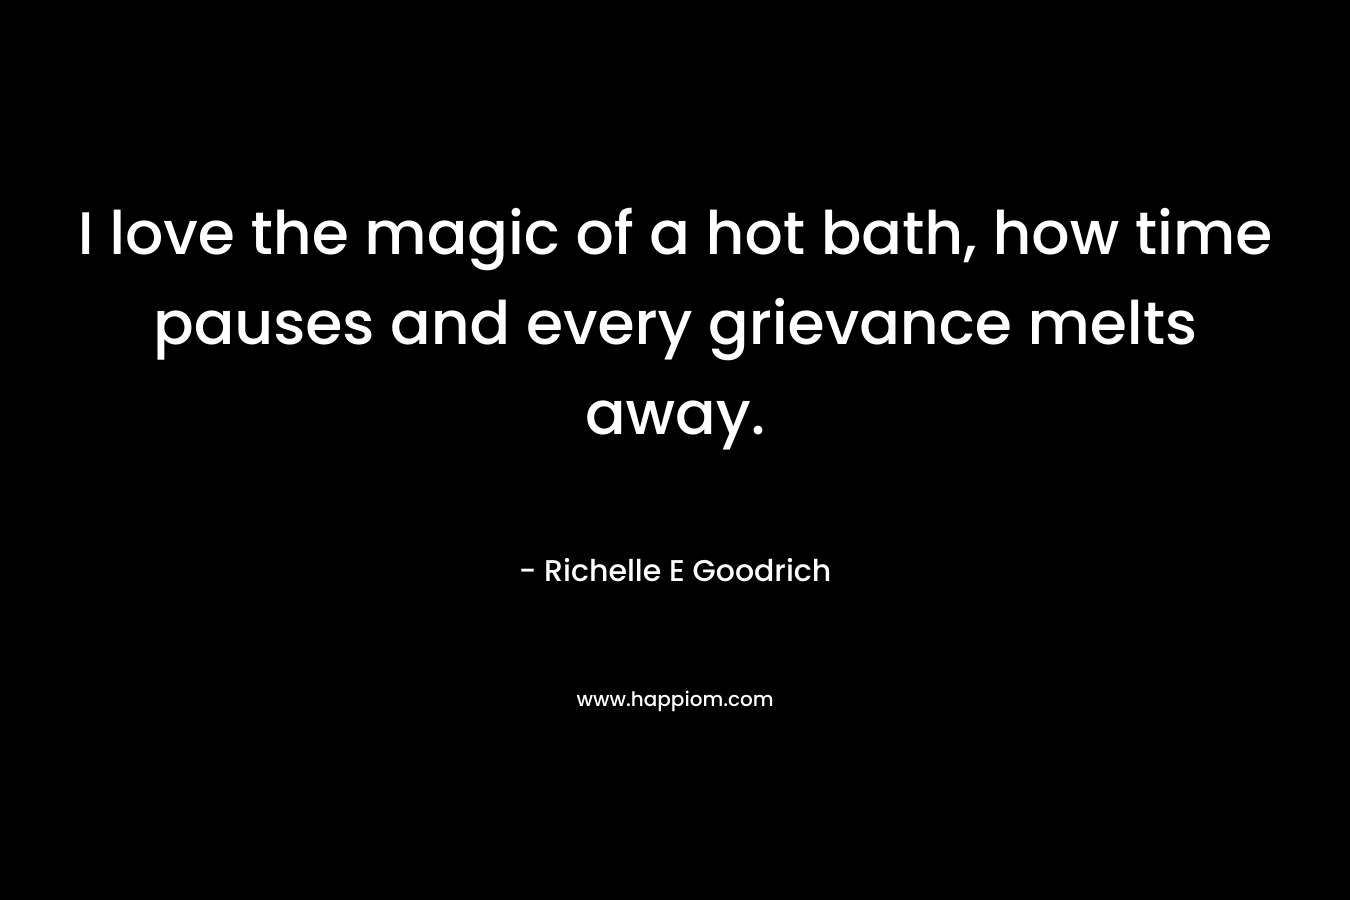 I love the magic of a hot bath, how time pauses and every grievance melts away.